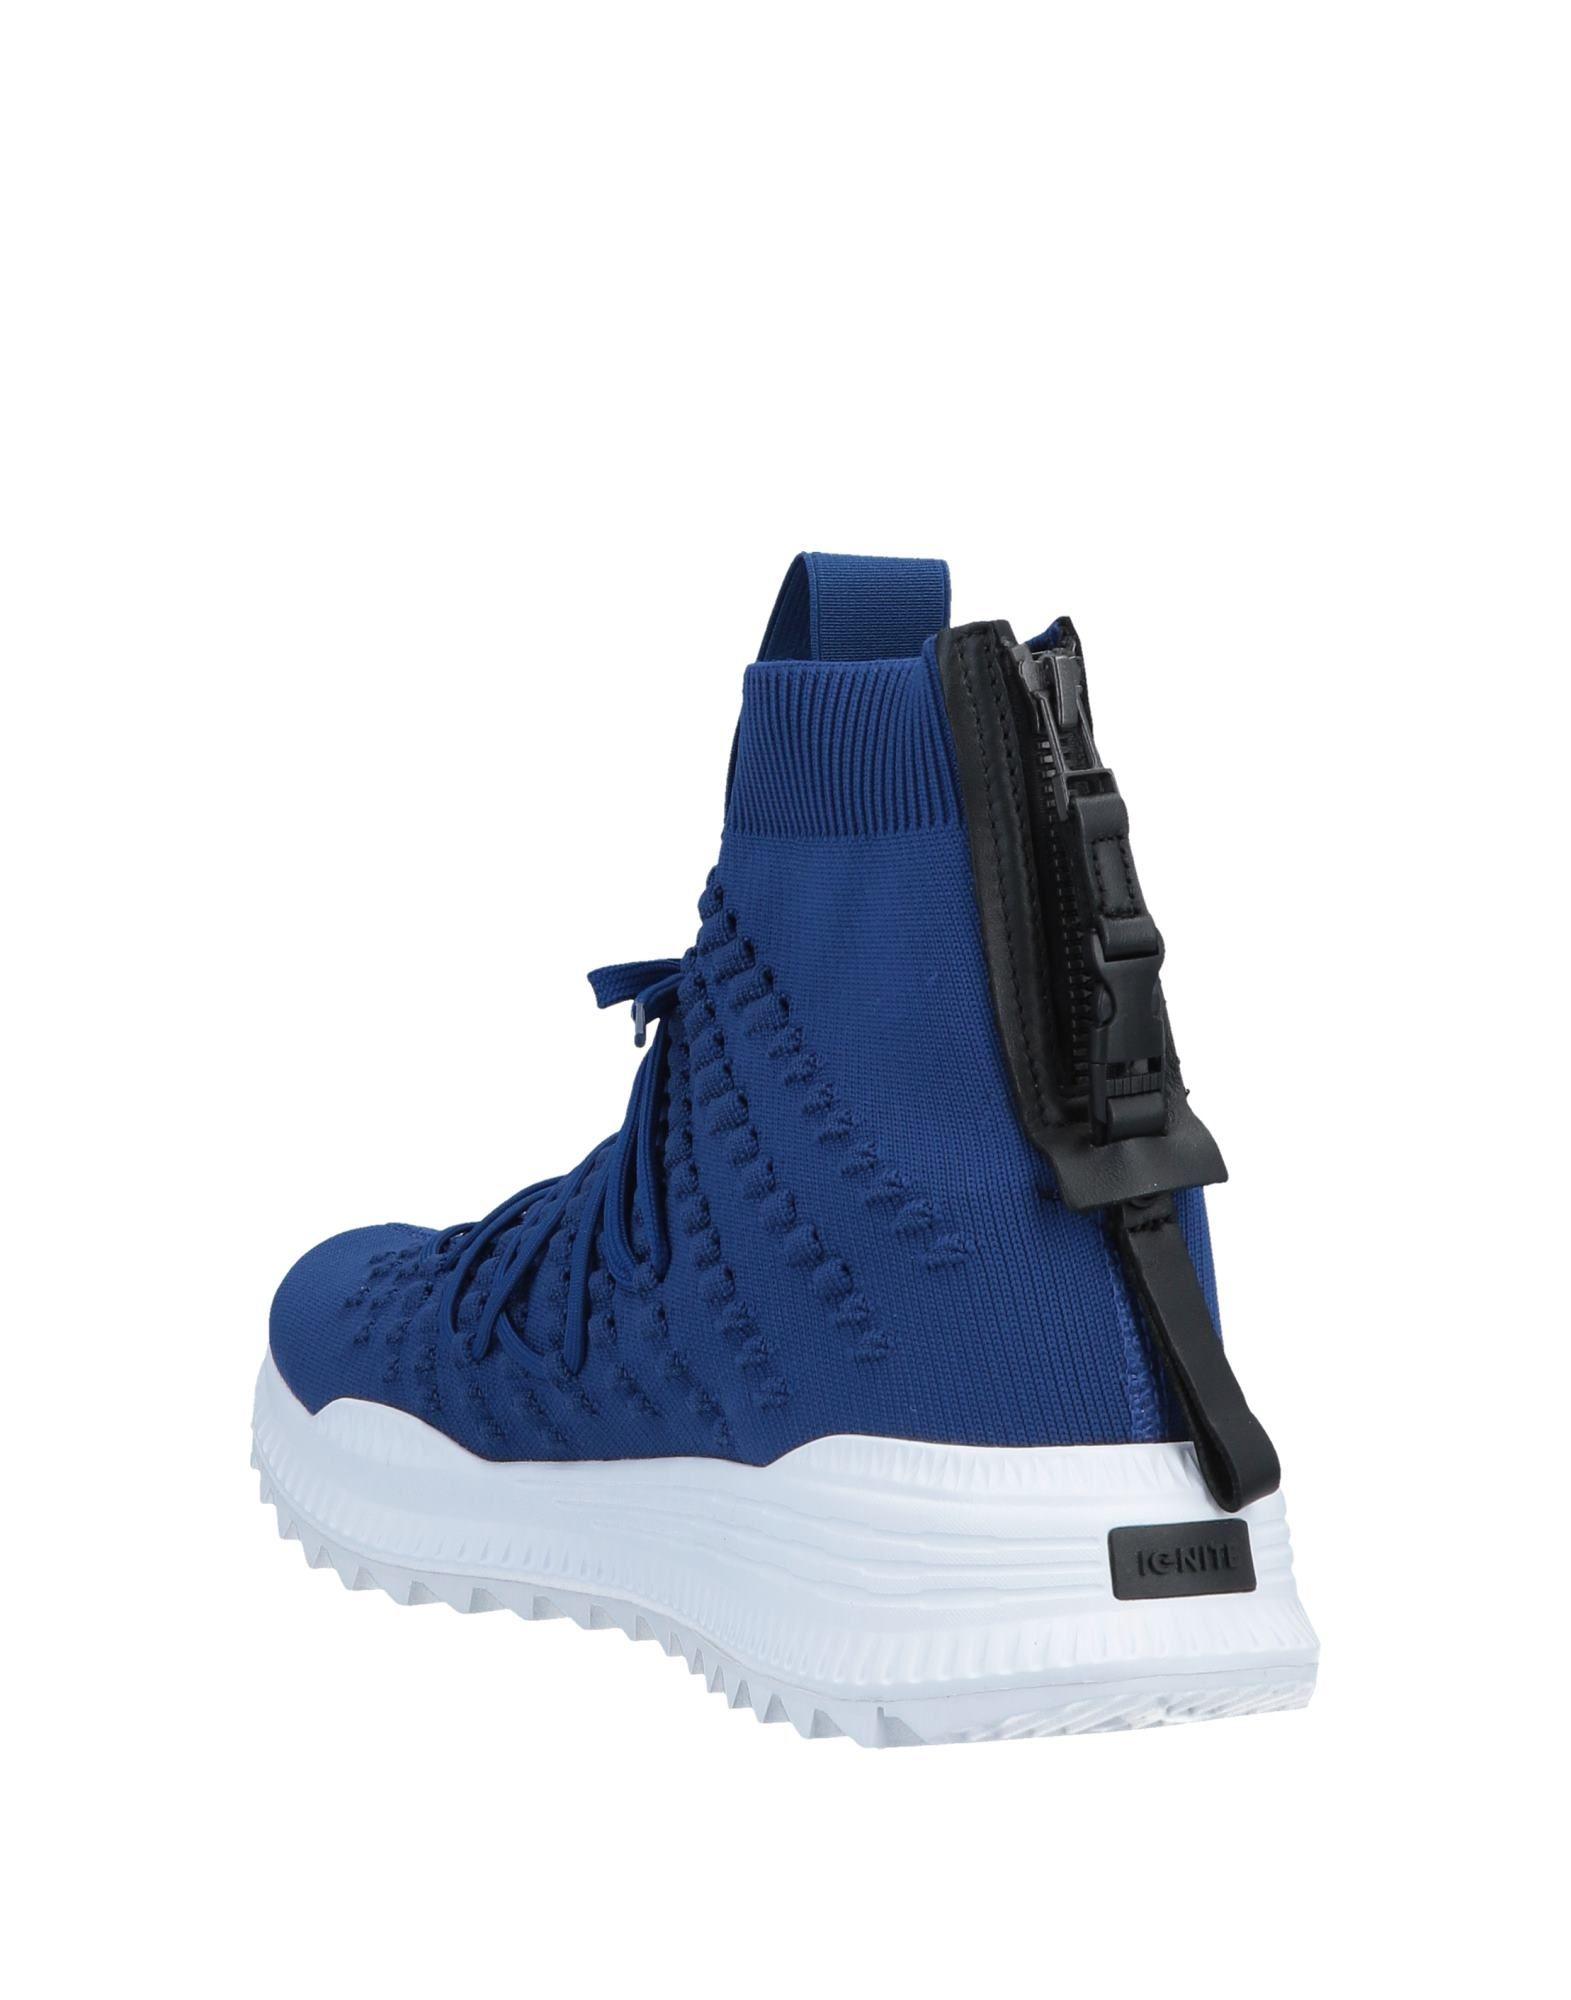 PUMA High-tops & Sneakers in Blue for Men - Lyst